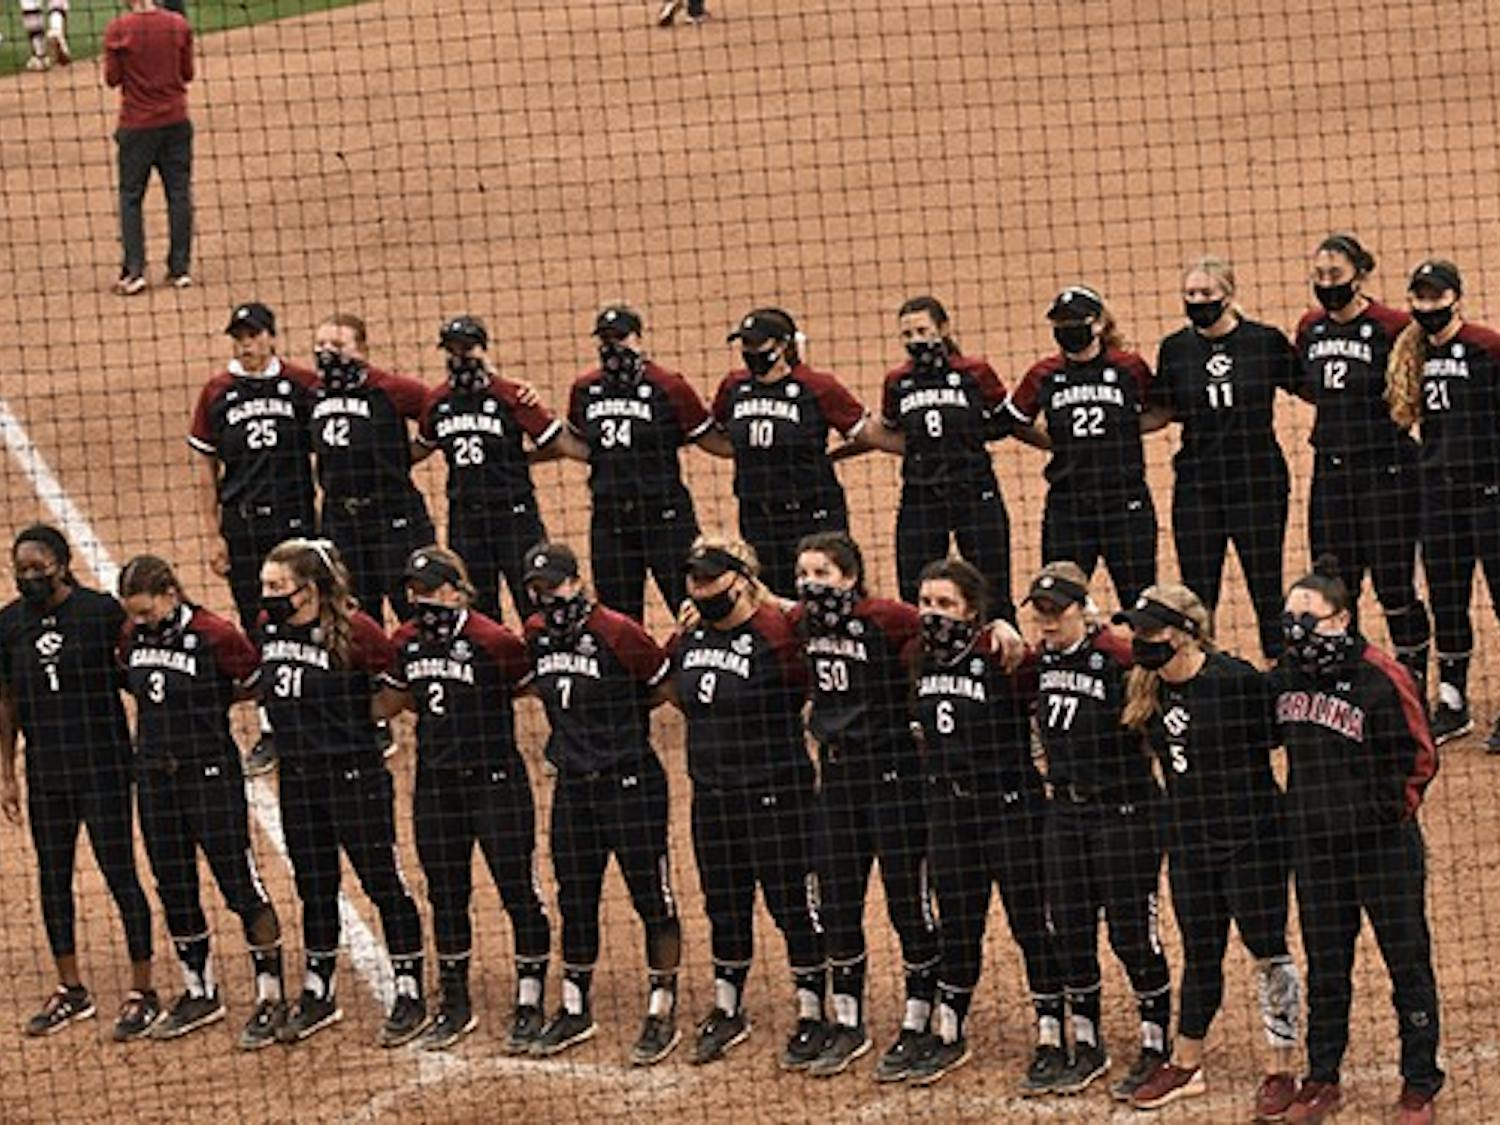 The South Carolina softball team stands together after its loss to Arkansas on March 13, 2021.